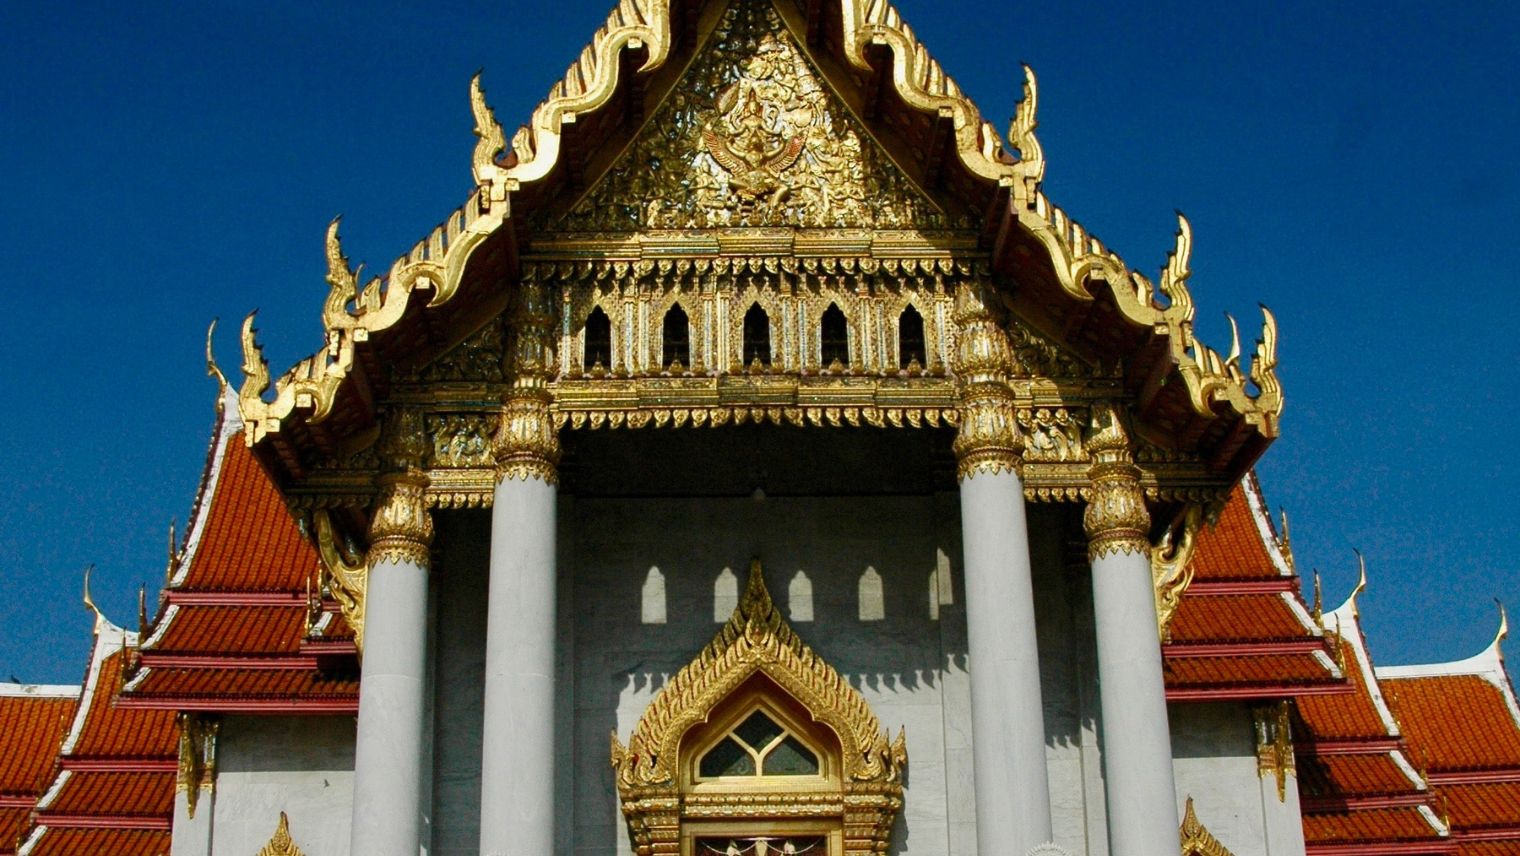 Wat Buddhapadipa is a true gem of Thai Buddhism architecture and traditions right here in London